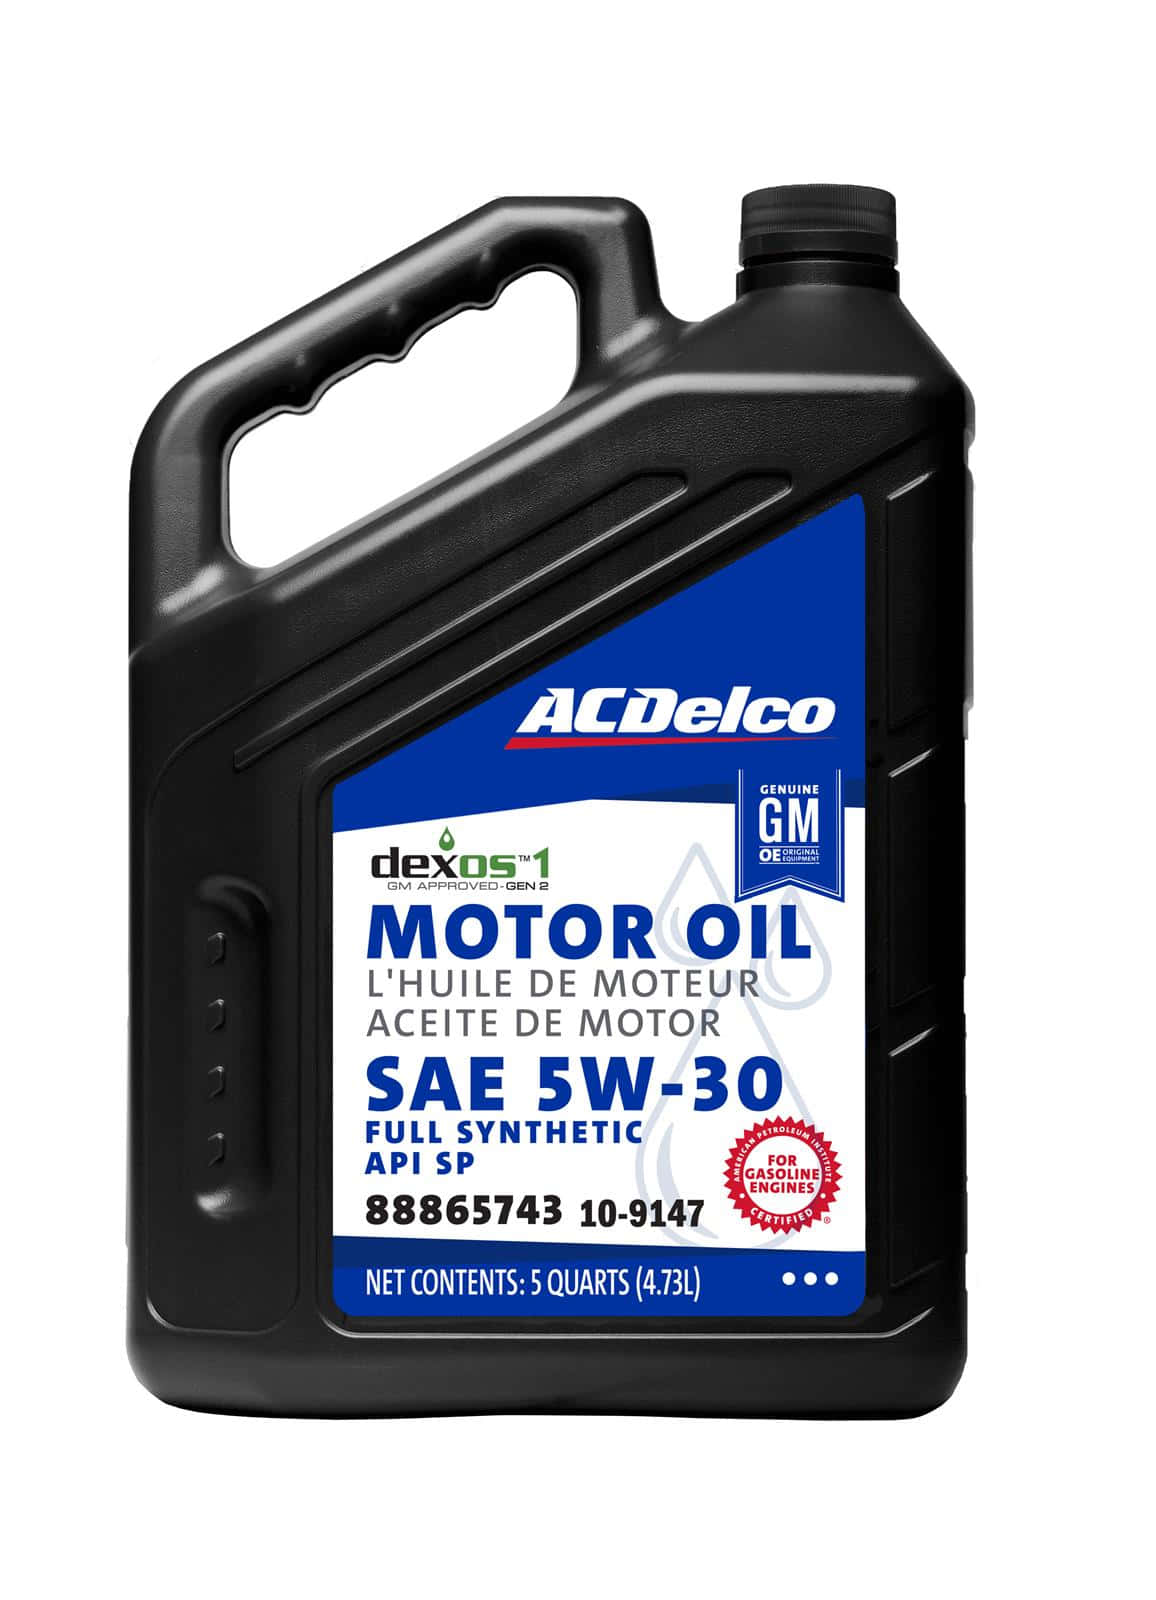 High quality engine oil keeps your vehicle running smoothly